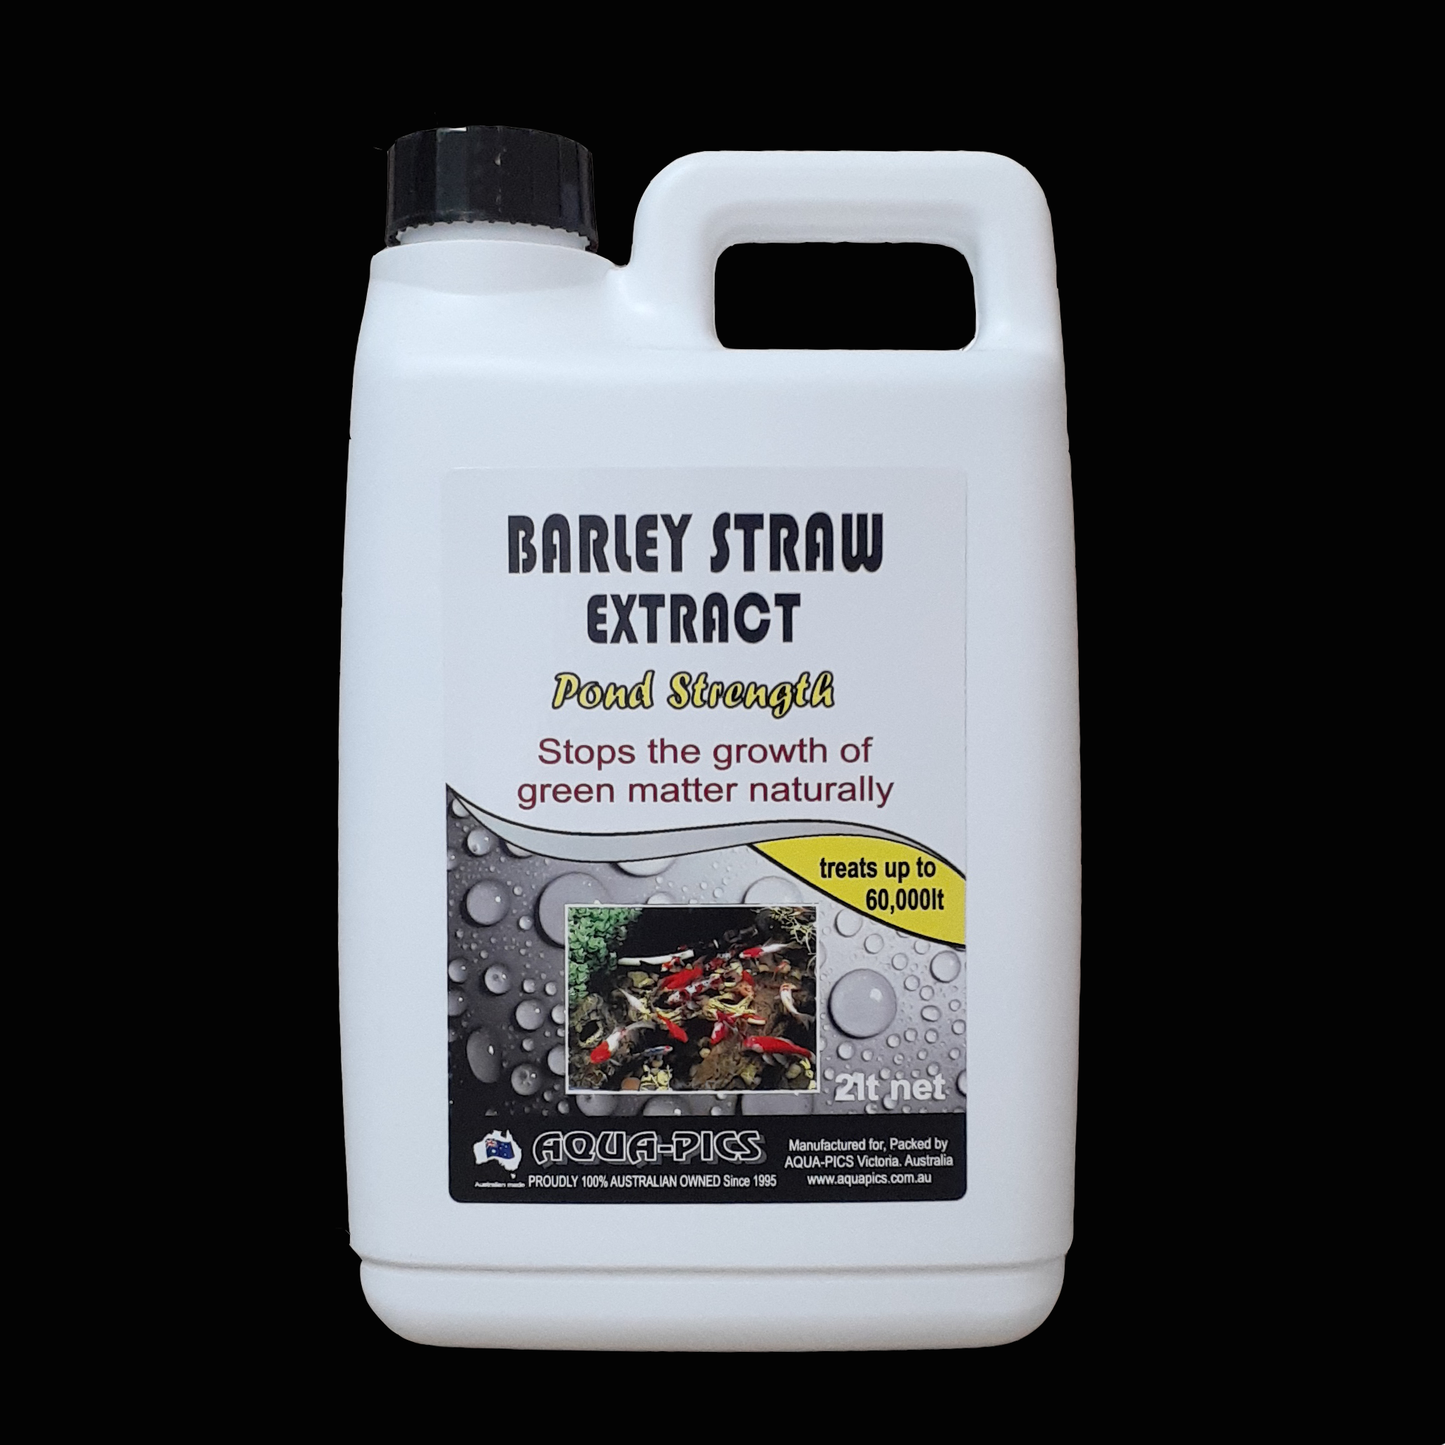 Barley Straw Extract Pond Strength 2 litre